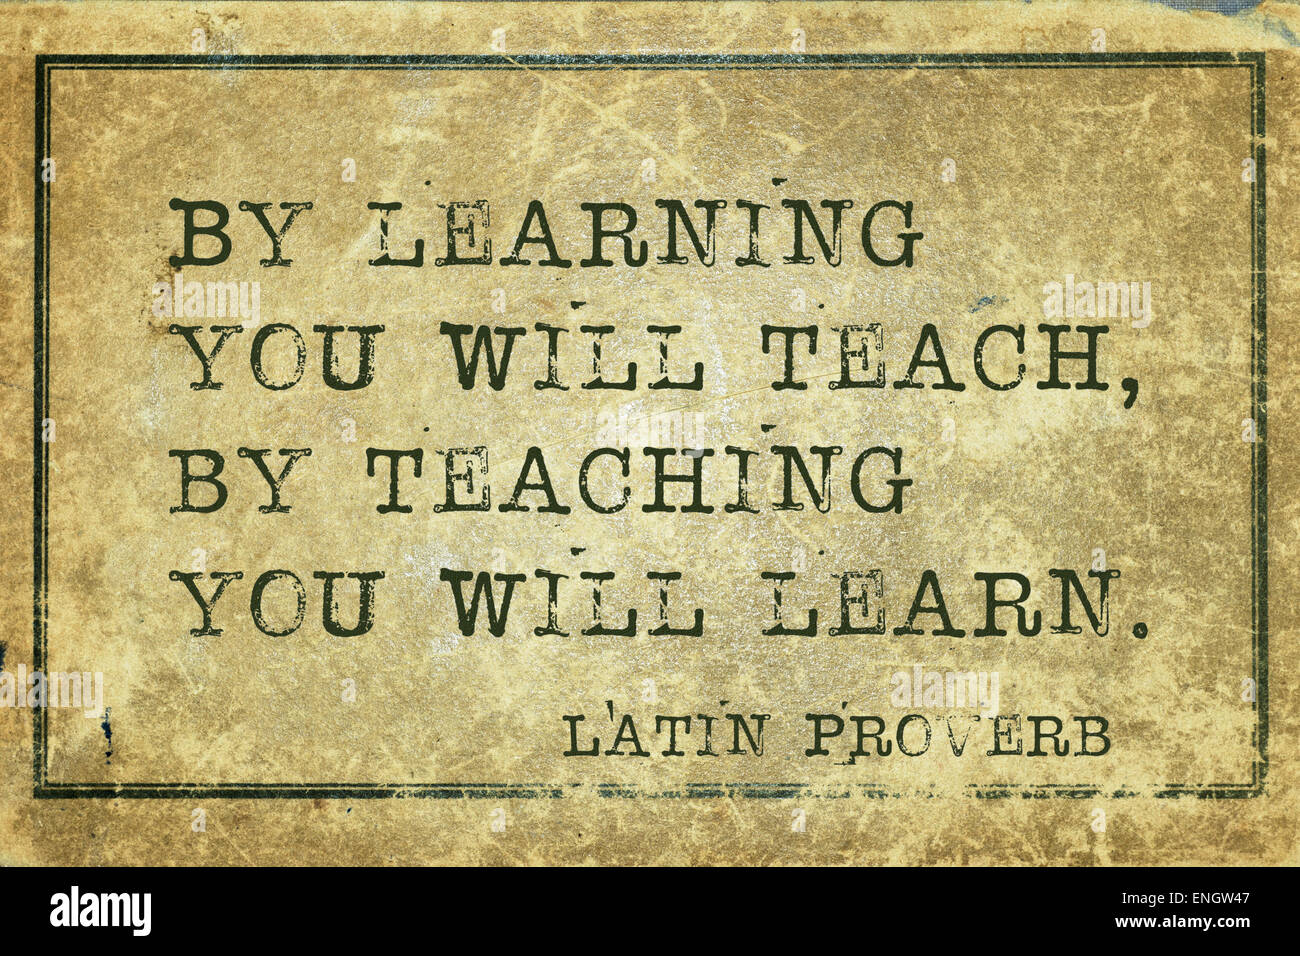 By learning you will teach, by teaching you will learn -  ancient Latin proverb printed on grunge vintage cardboard Stock Photo